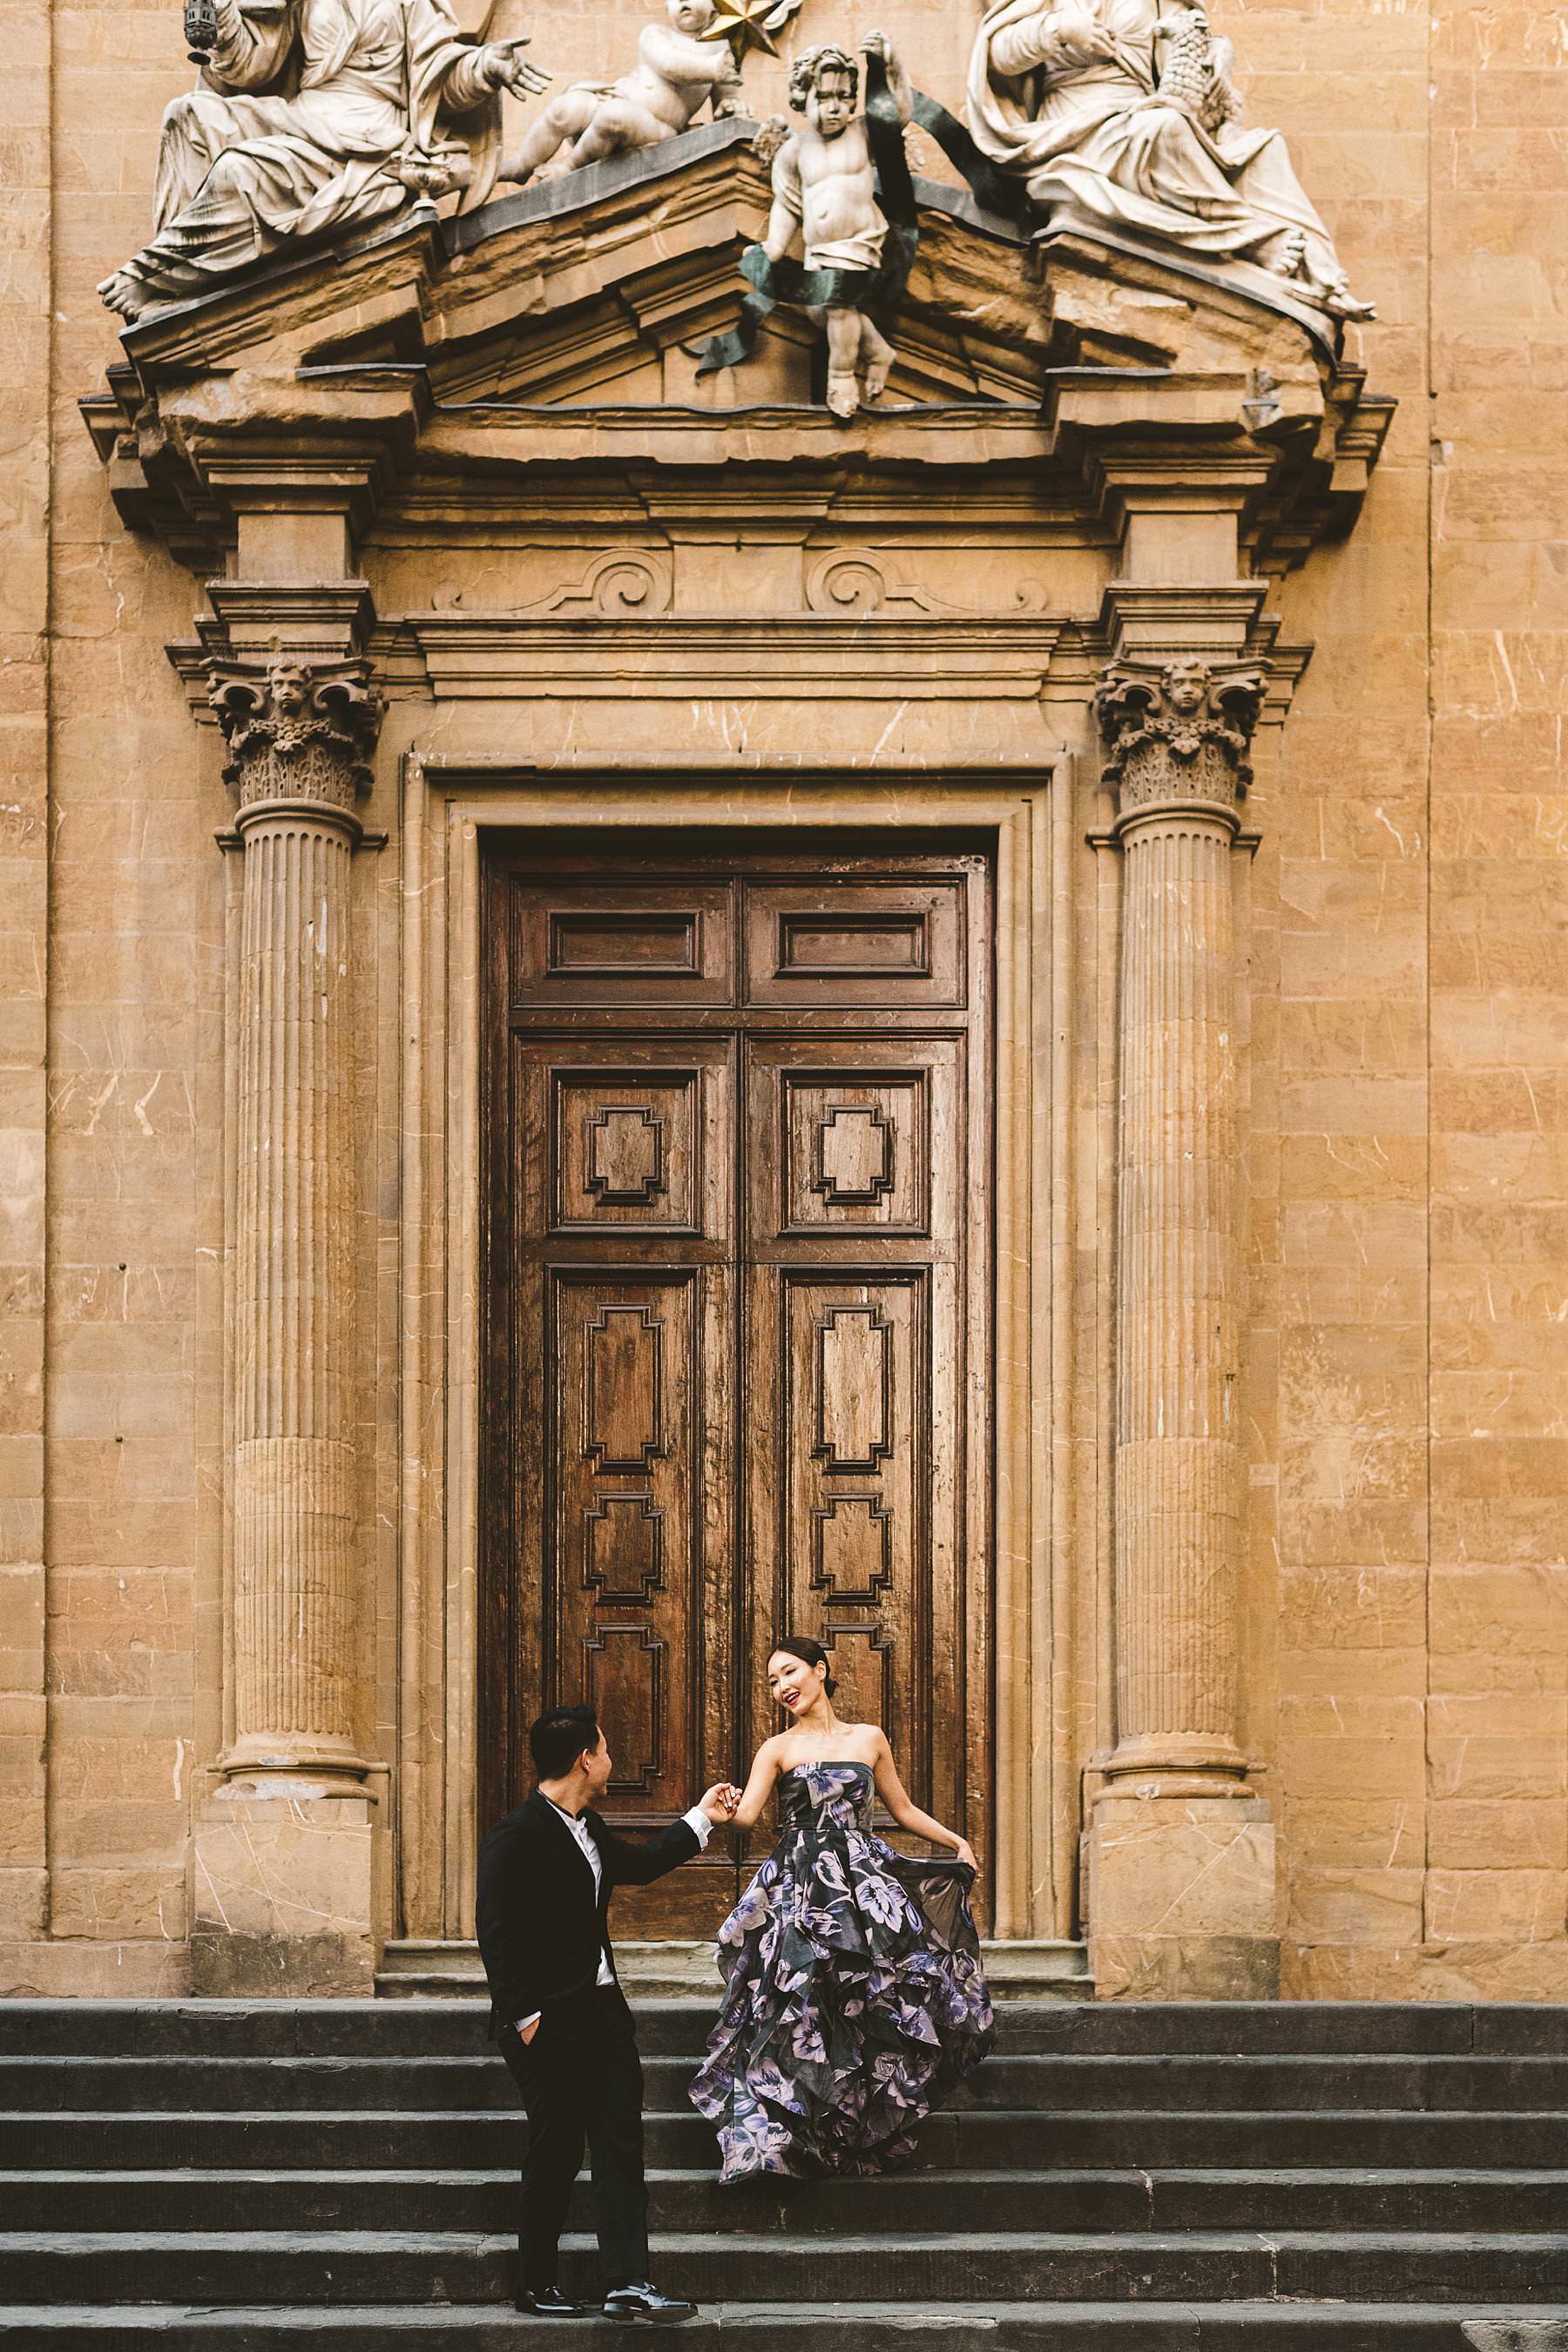 Elegant couple portrait photo session in the heart of Florence city at Piazza San Firenze near Palazzo Vecchio and Palazzo Gondi